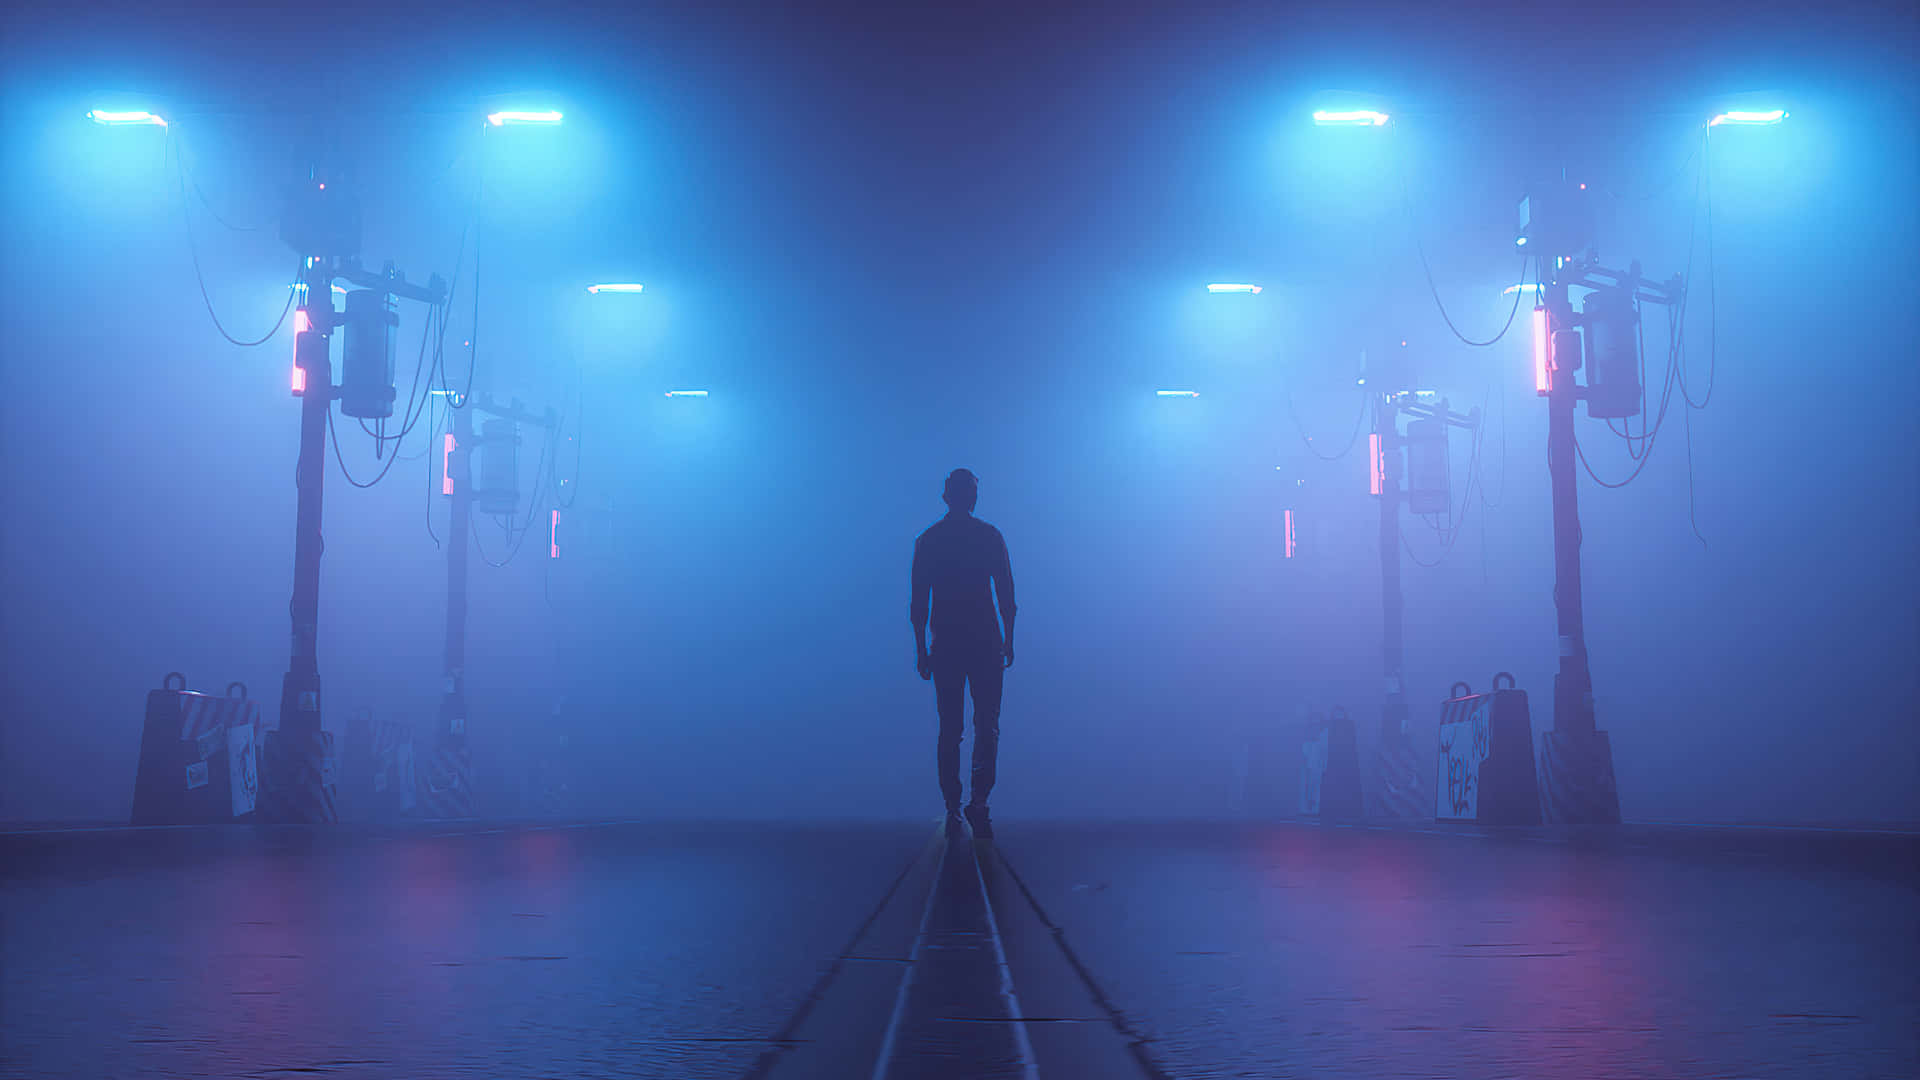 A Person Standing In A Foggy Tunnel With Blue Lights Wallpaper